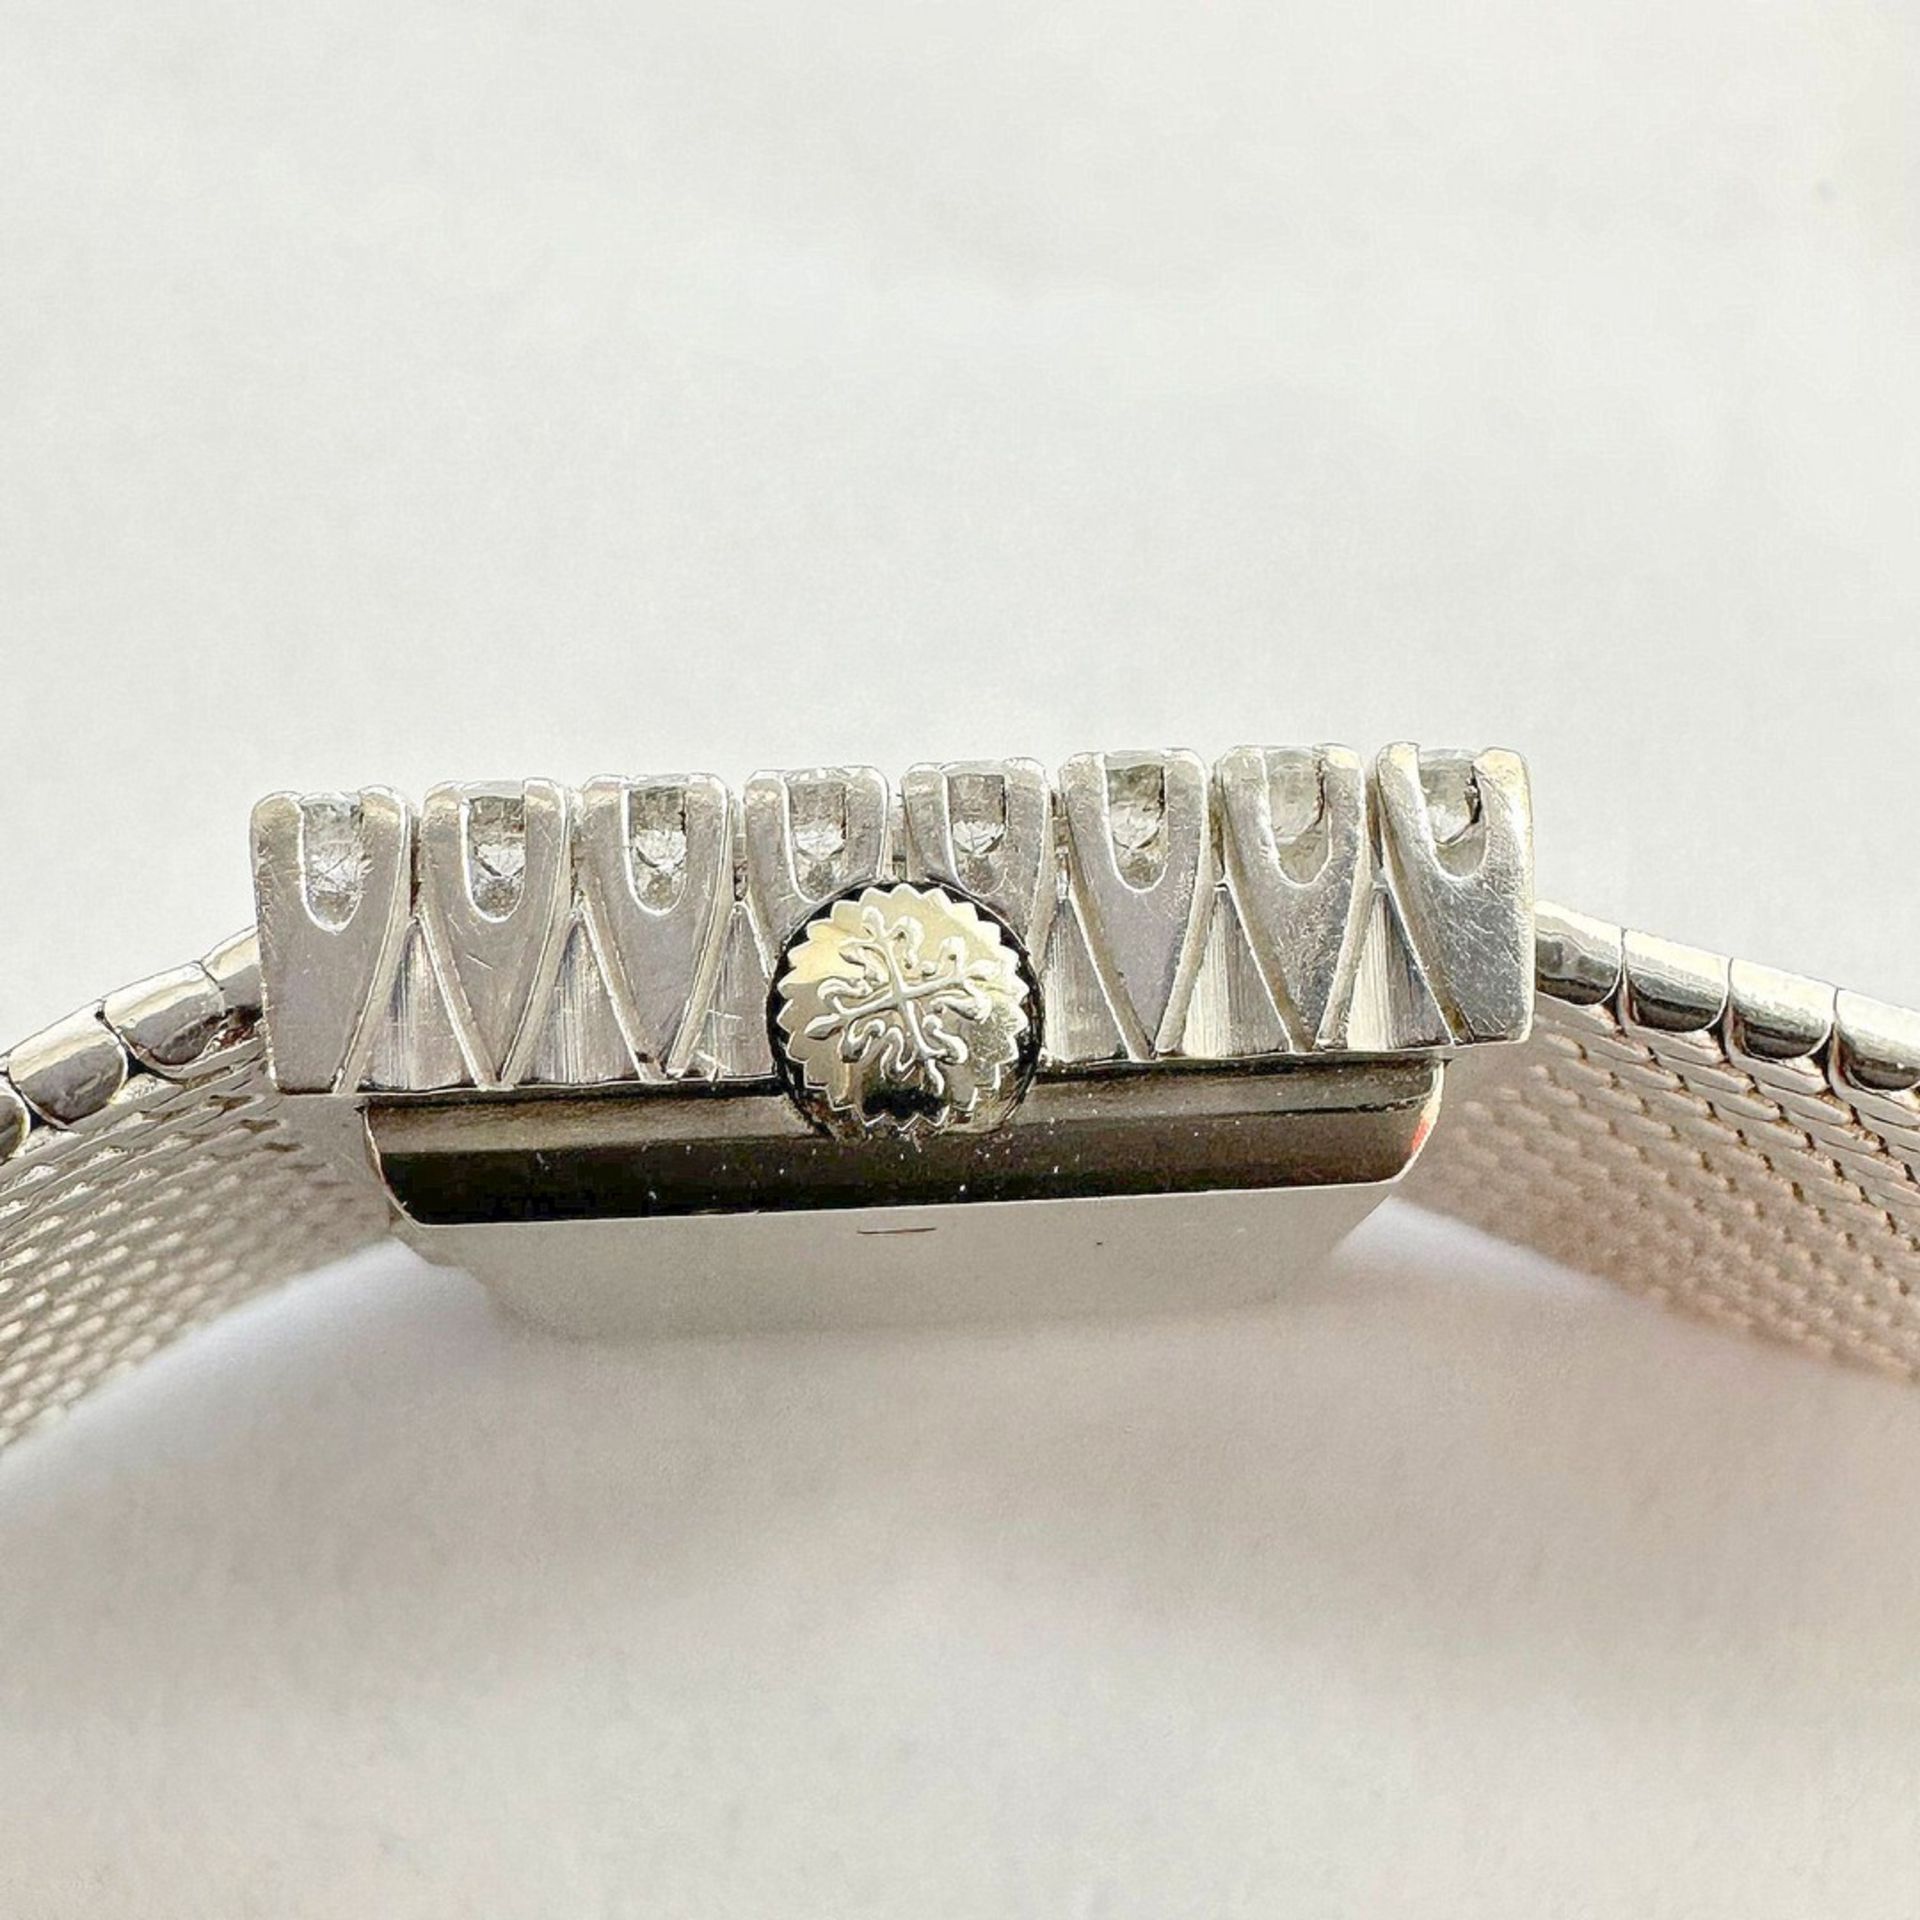 Patek Philippe / Cocktail Vintage 18K White Gold - Lady's White Gold Wristwatch - Image 3 of 14